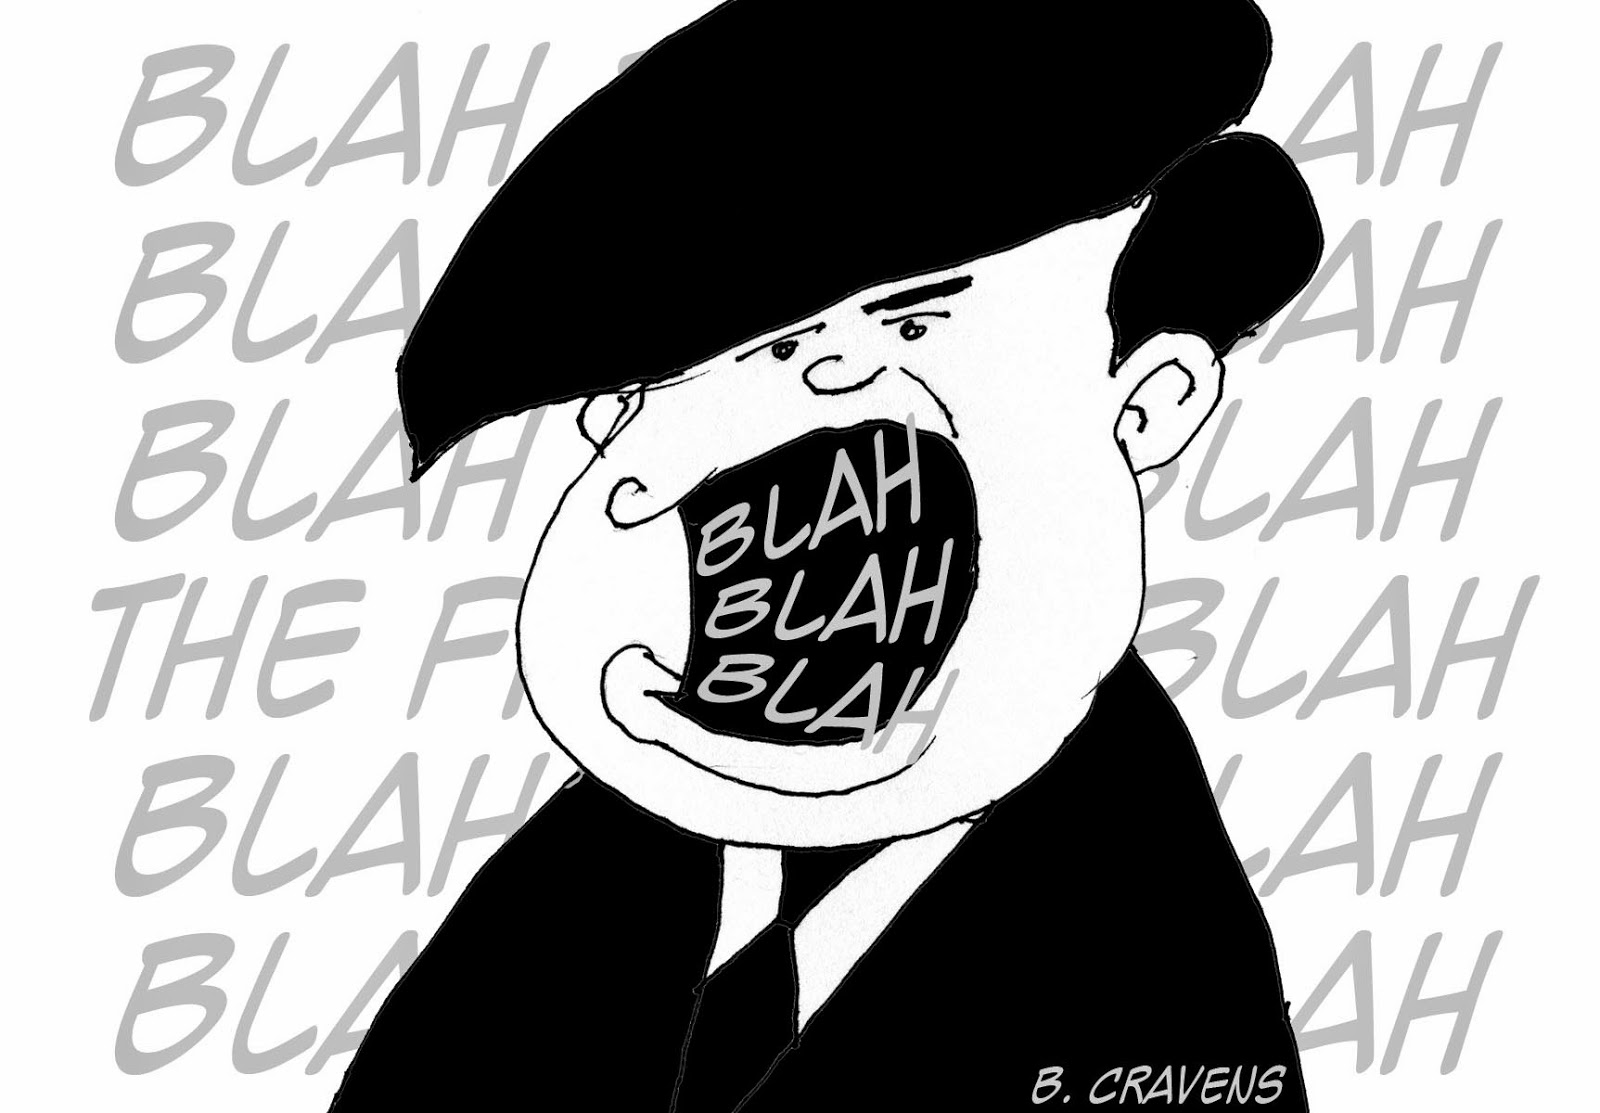 Blabbermouth meaning. Blabbermouth. Be a blabbermouth. Blabbering.